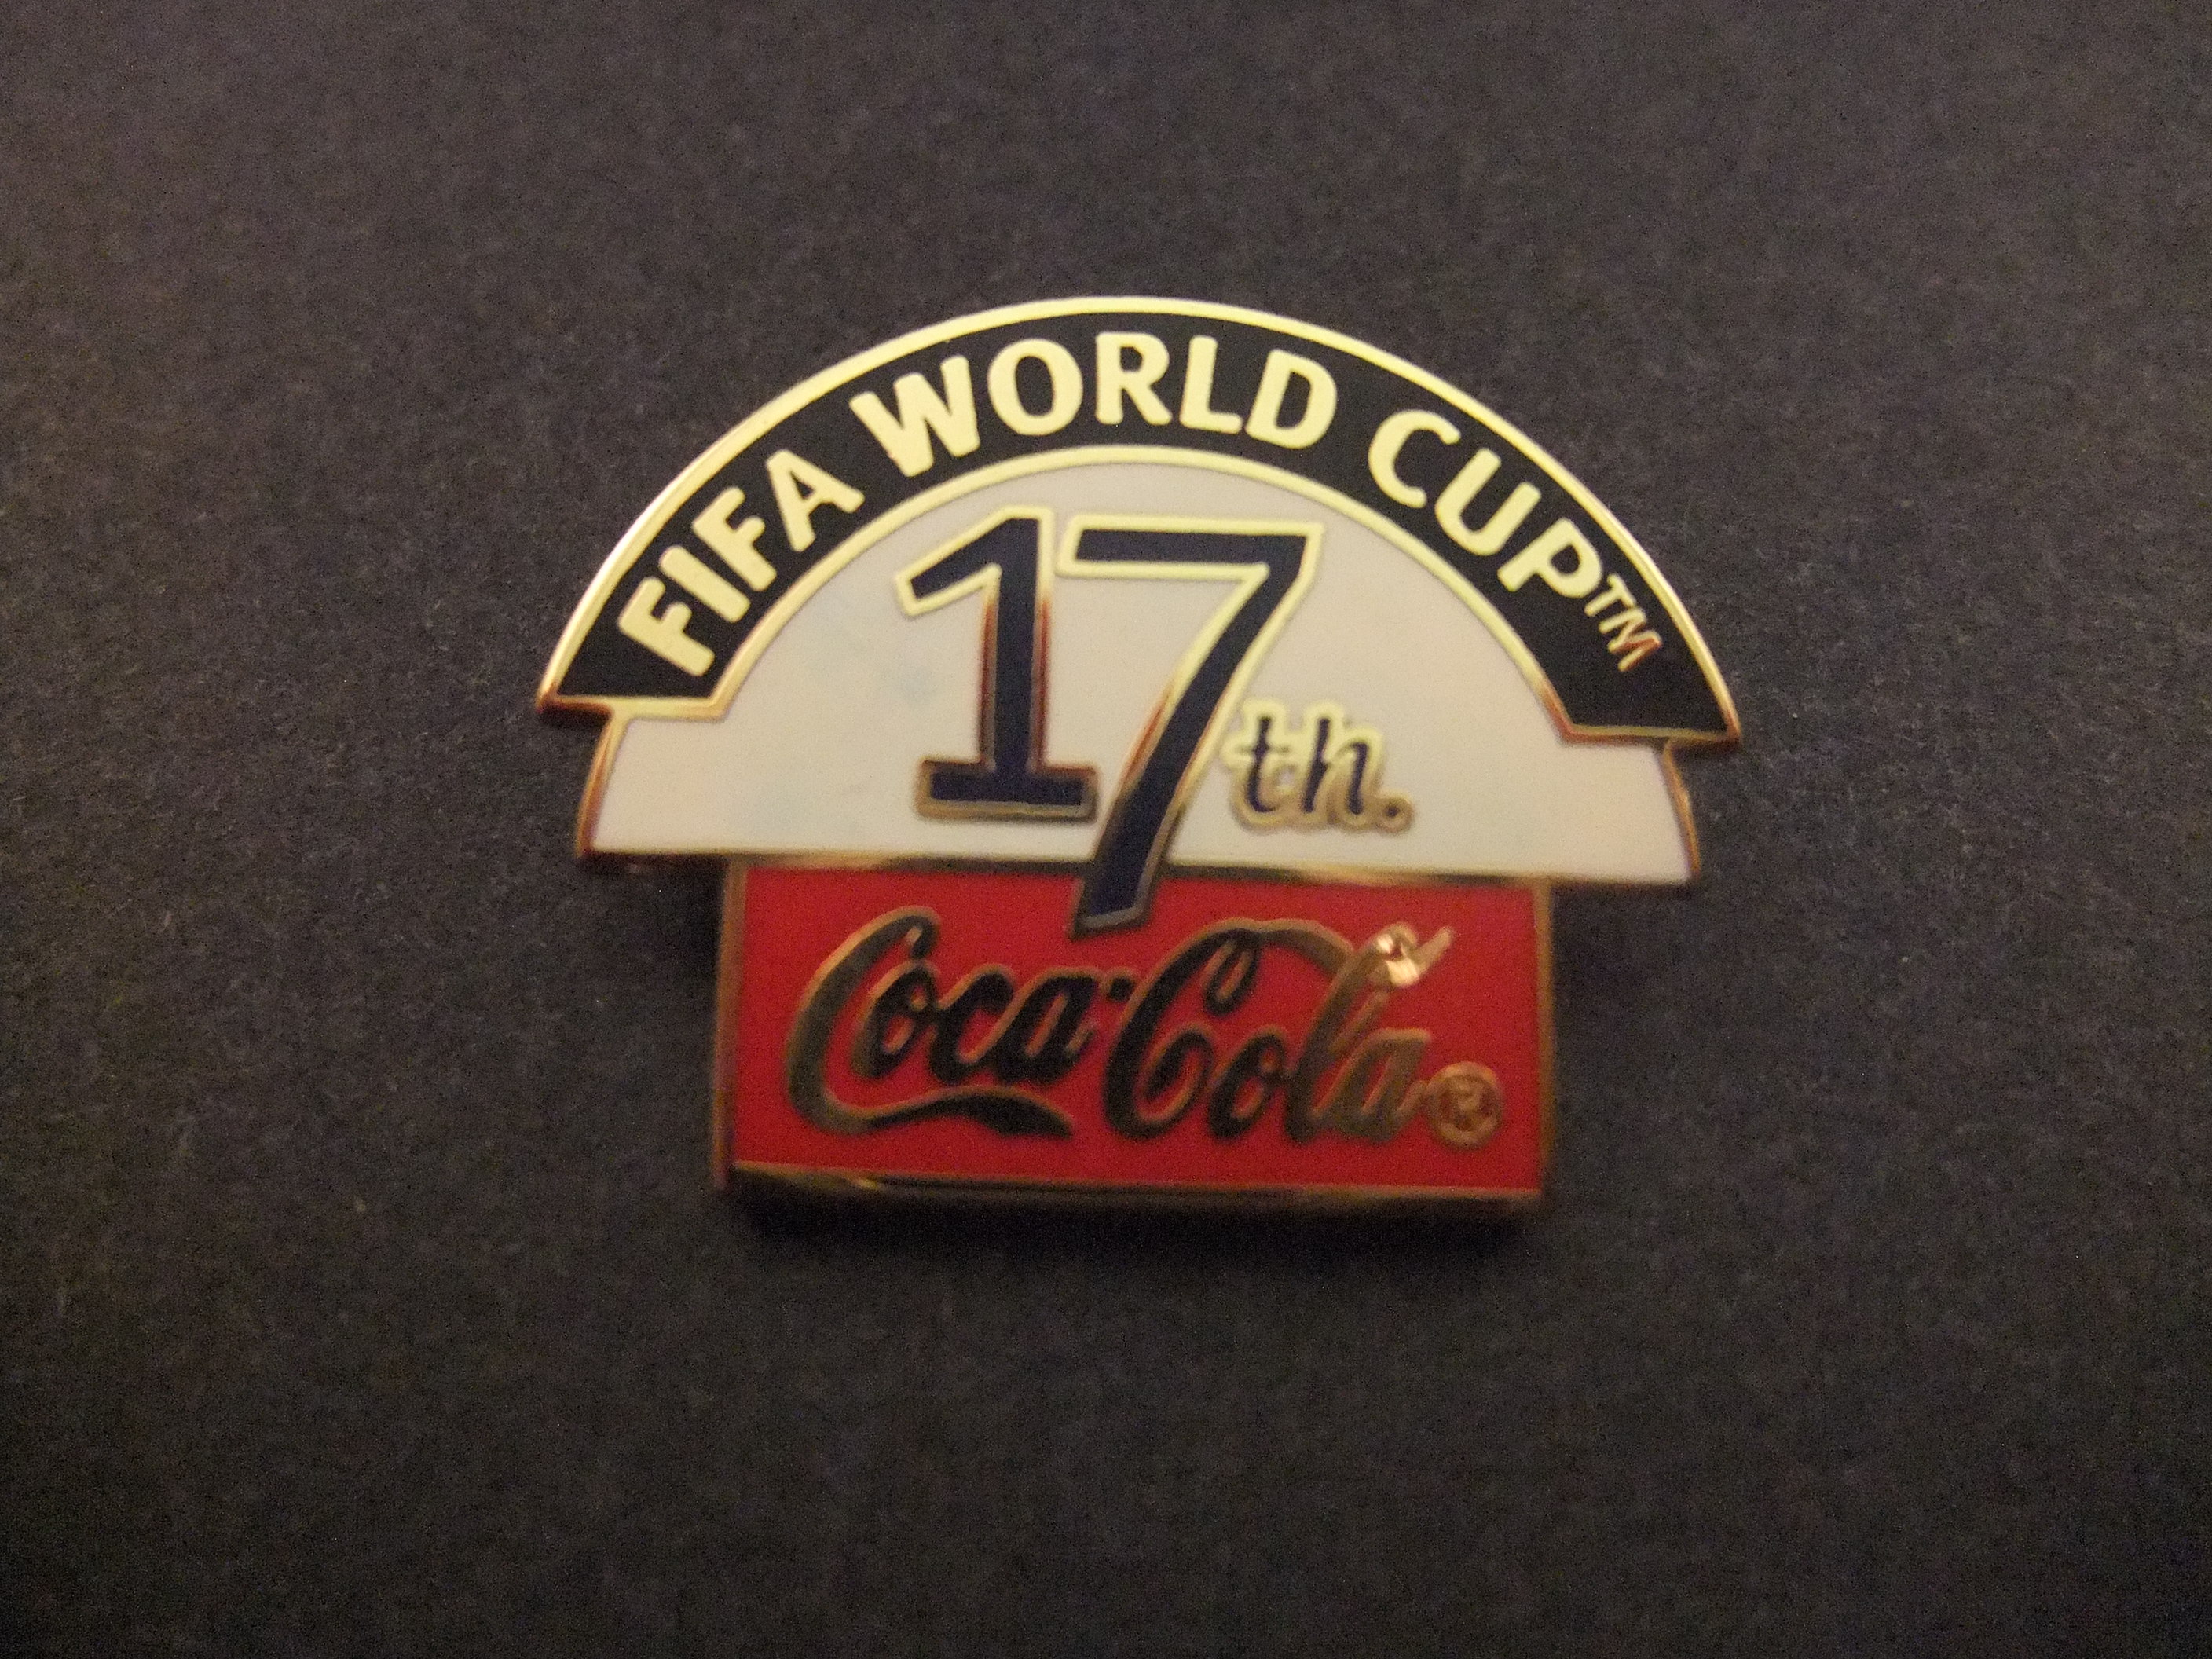 Fifa world Cup voetbal sponsor Coca Cola 17 th